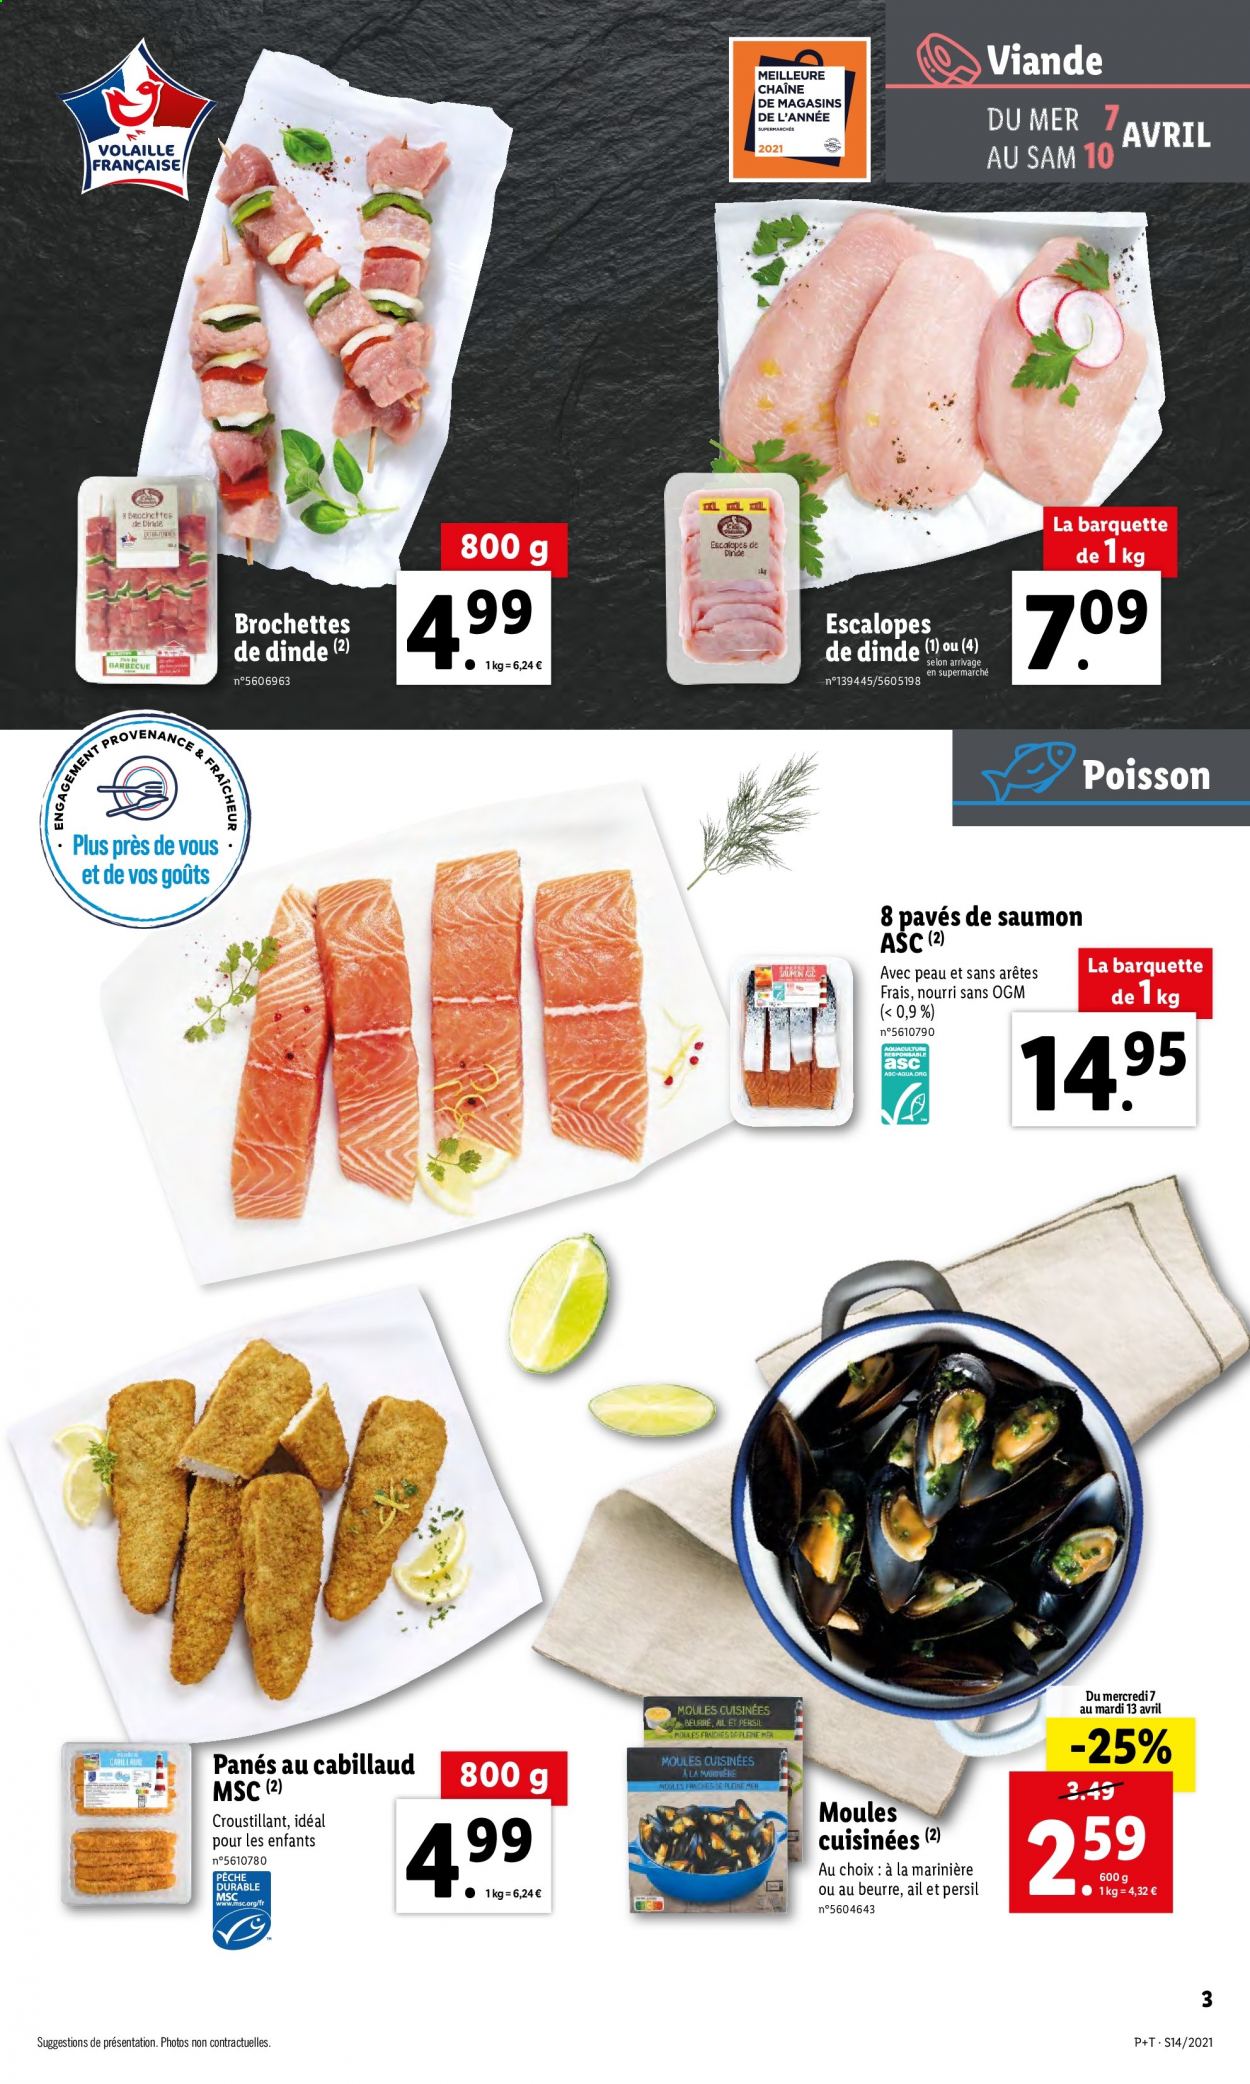 Catalogue Lidl - 07.04.2021 - 13.04.2021. Page 3.